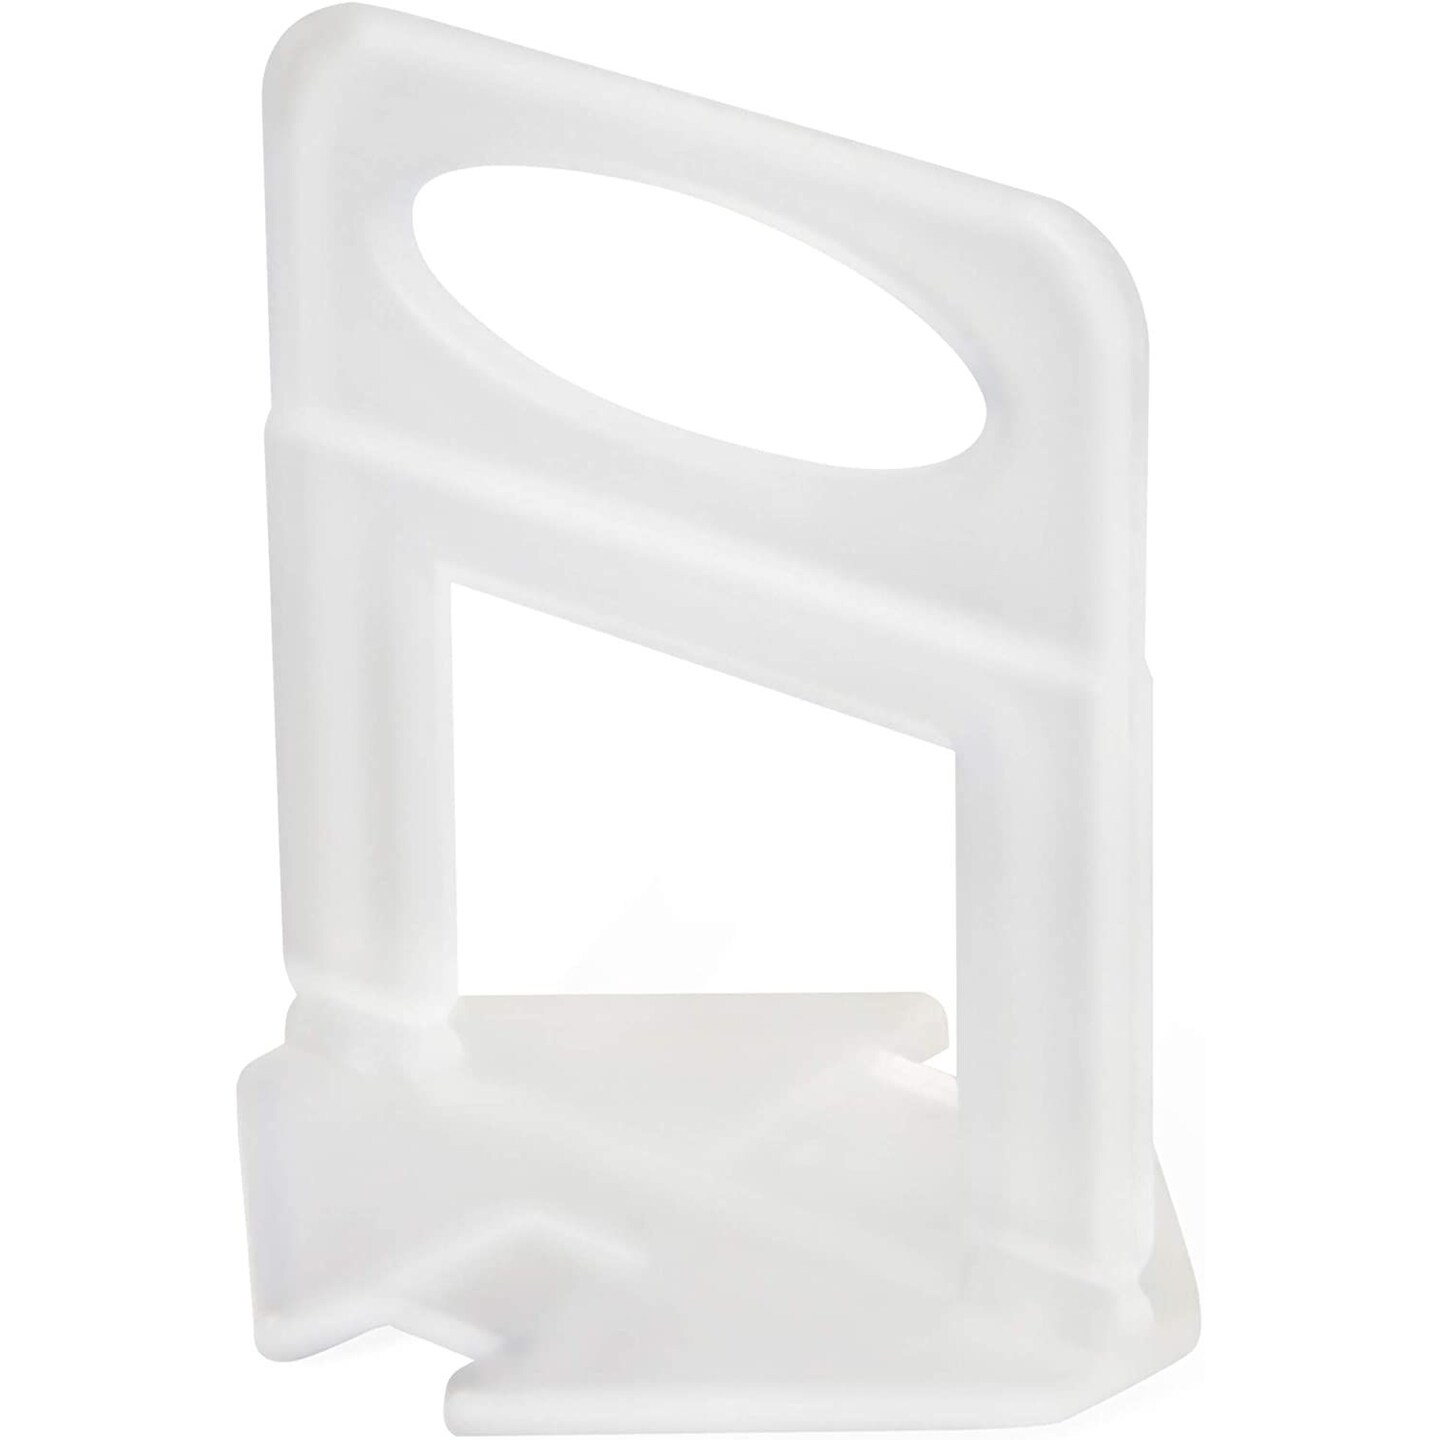 Reusable Tile Leveling System Clips (1/16 in, White, Plastic, 400 Pack)